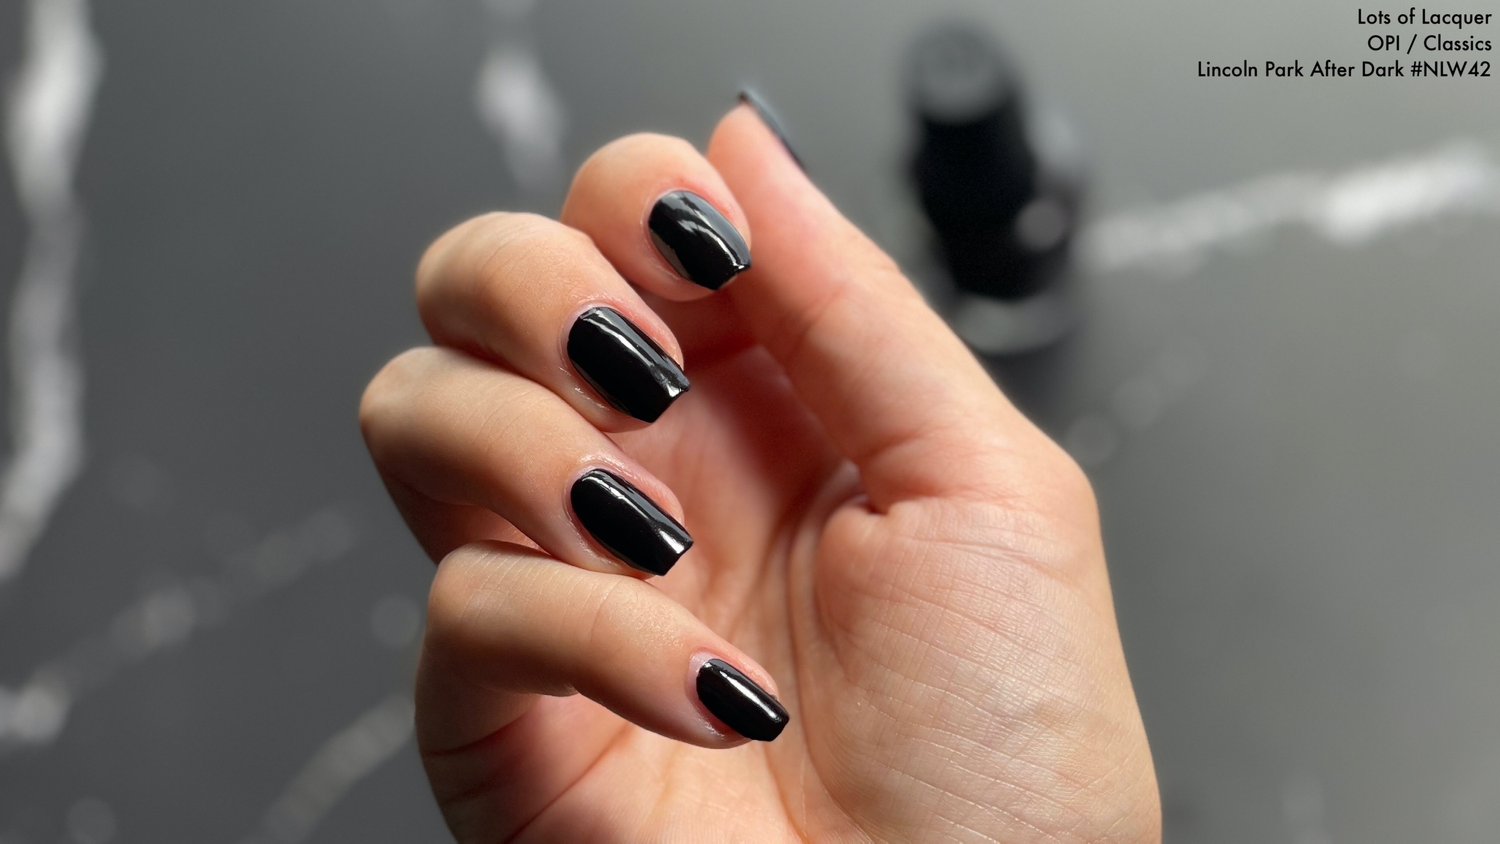 10. OPI Nail Lacquer in "Lincoln Park After Dark" - wide 10